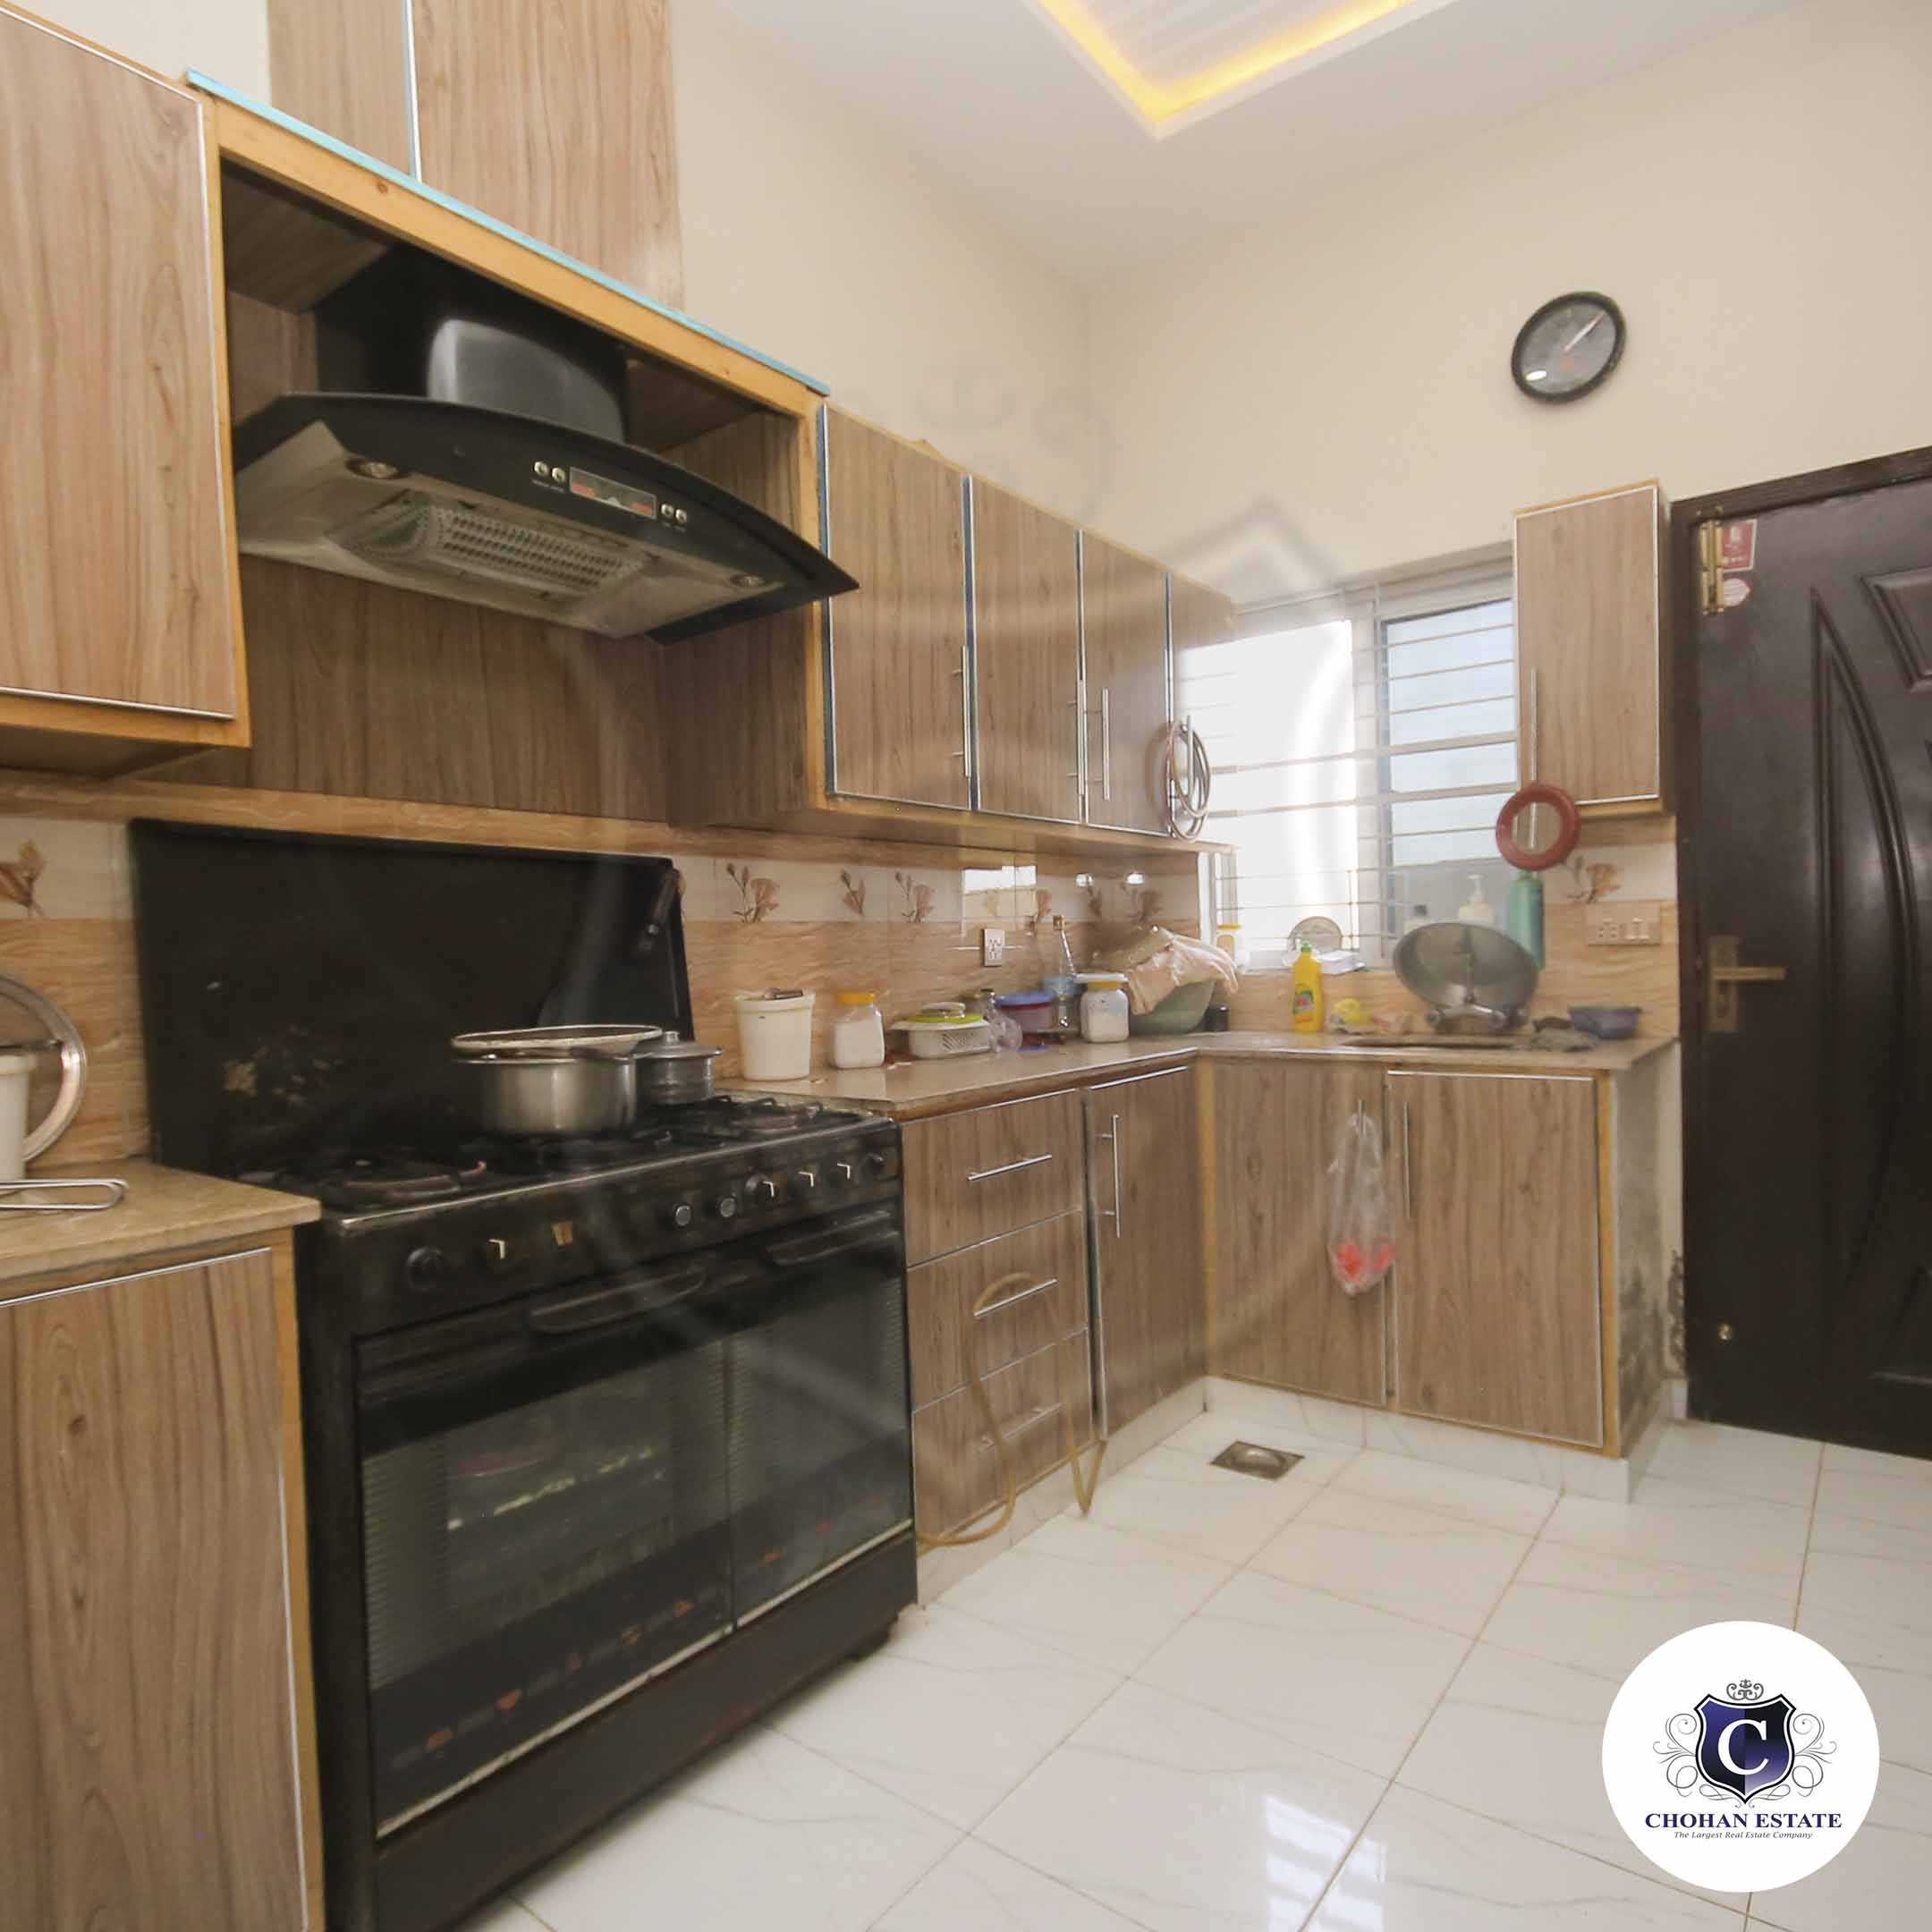 10 Marla Well Maintained Bungalow DHA